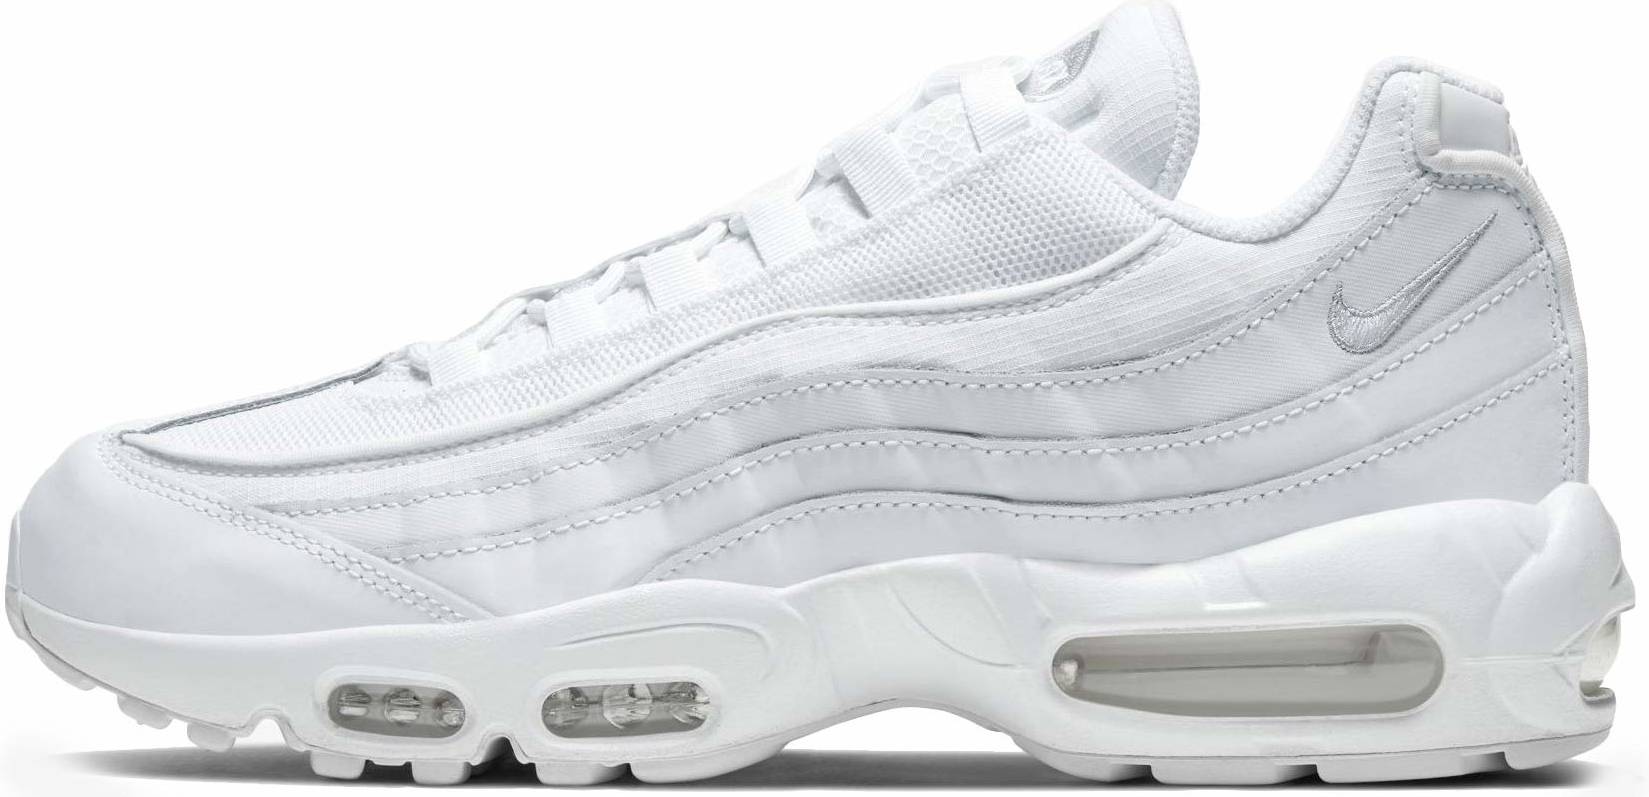 Wash windows announcer Oh dear Nike Air Max 95 Essential sneakers in 30+ colors (only $110) | RunRepeat